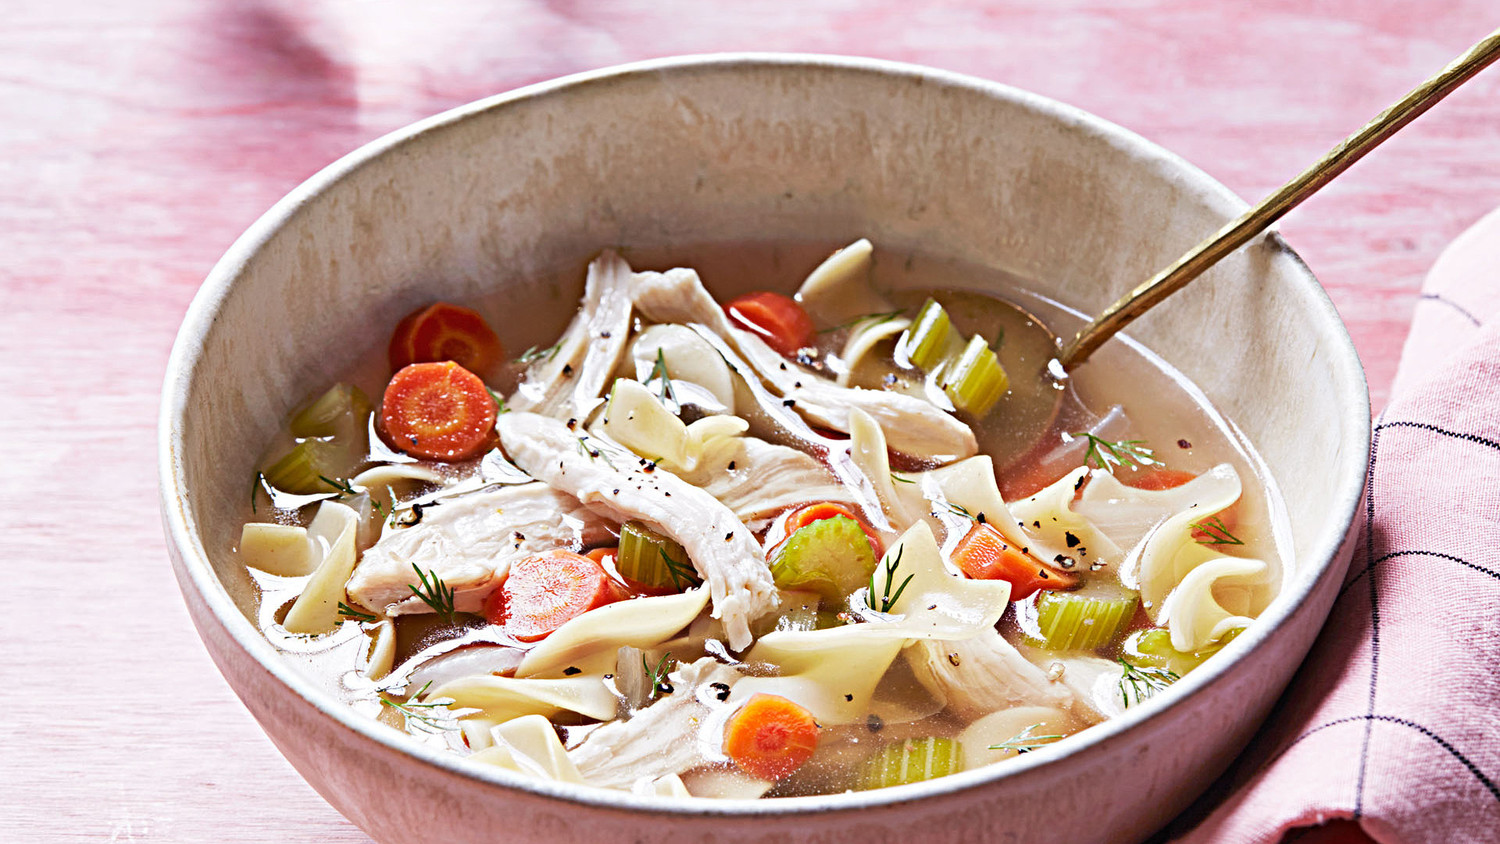 How to Make Our Test Kitchen's All-Time Favorite Chicken Noodle Soup